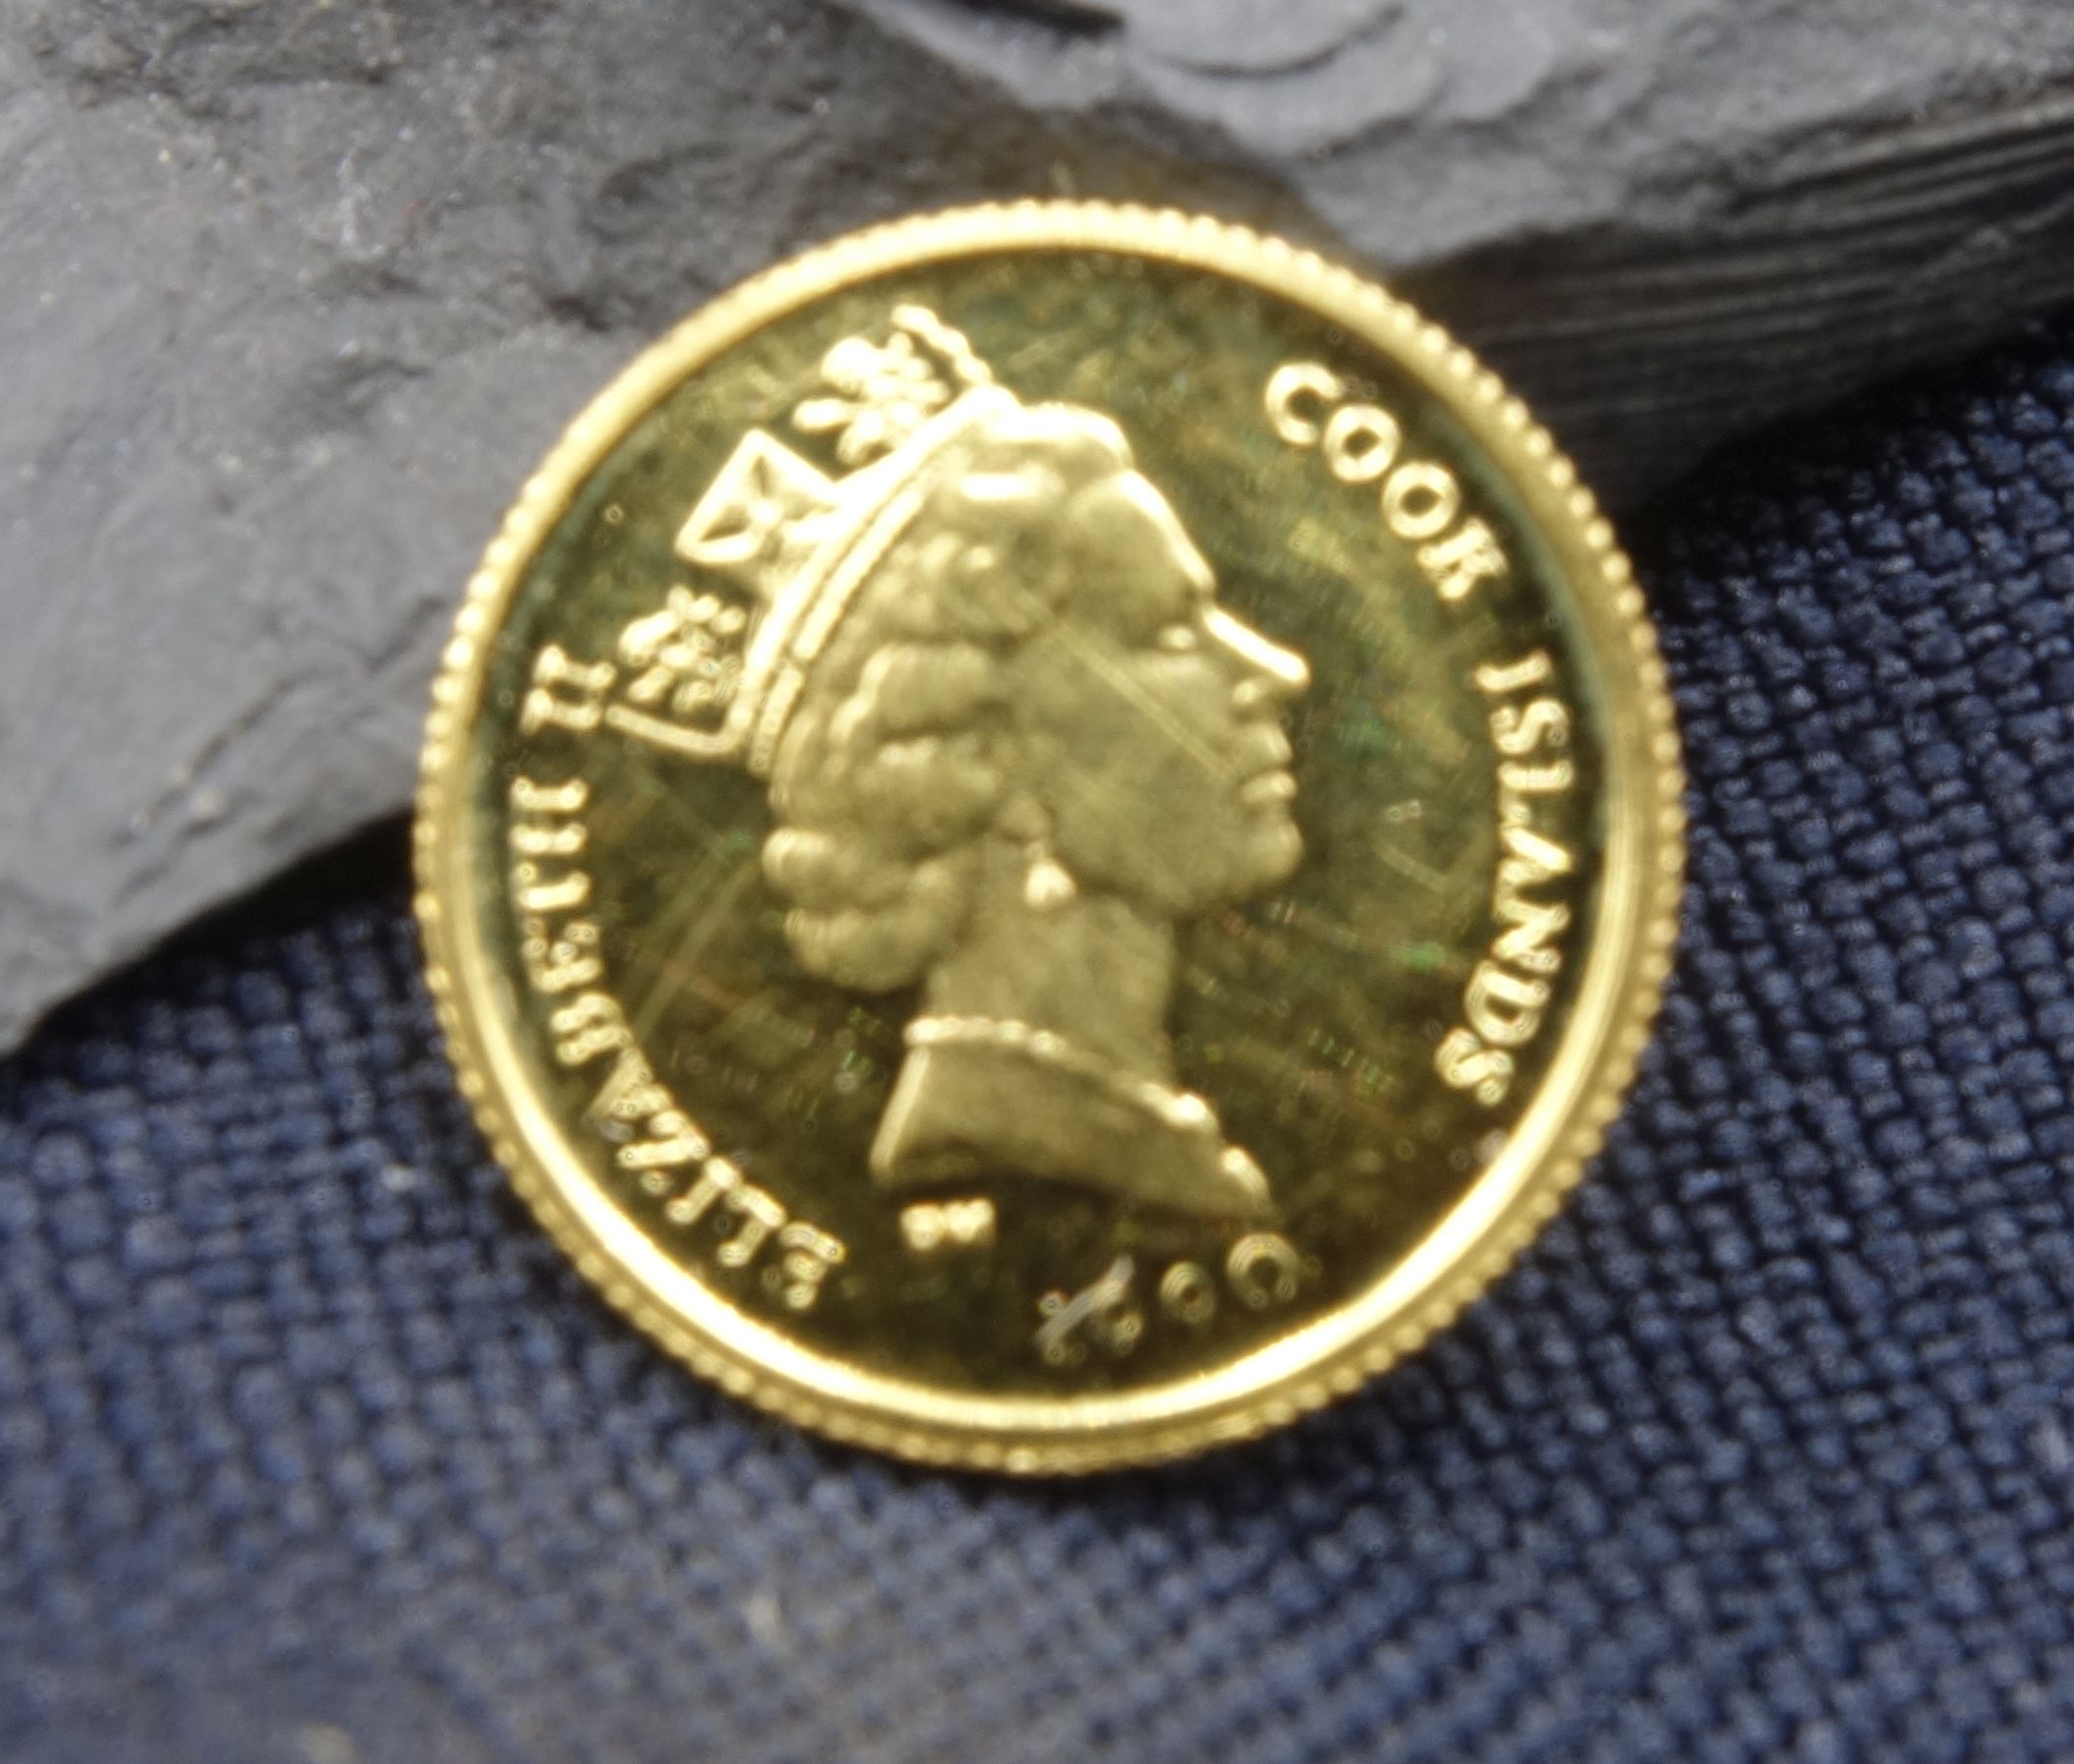 GOLD COIN - 25 DOLLAR - Image 2 of 2